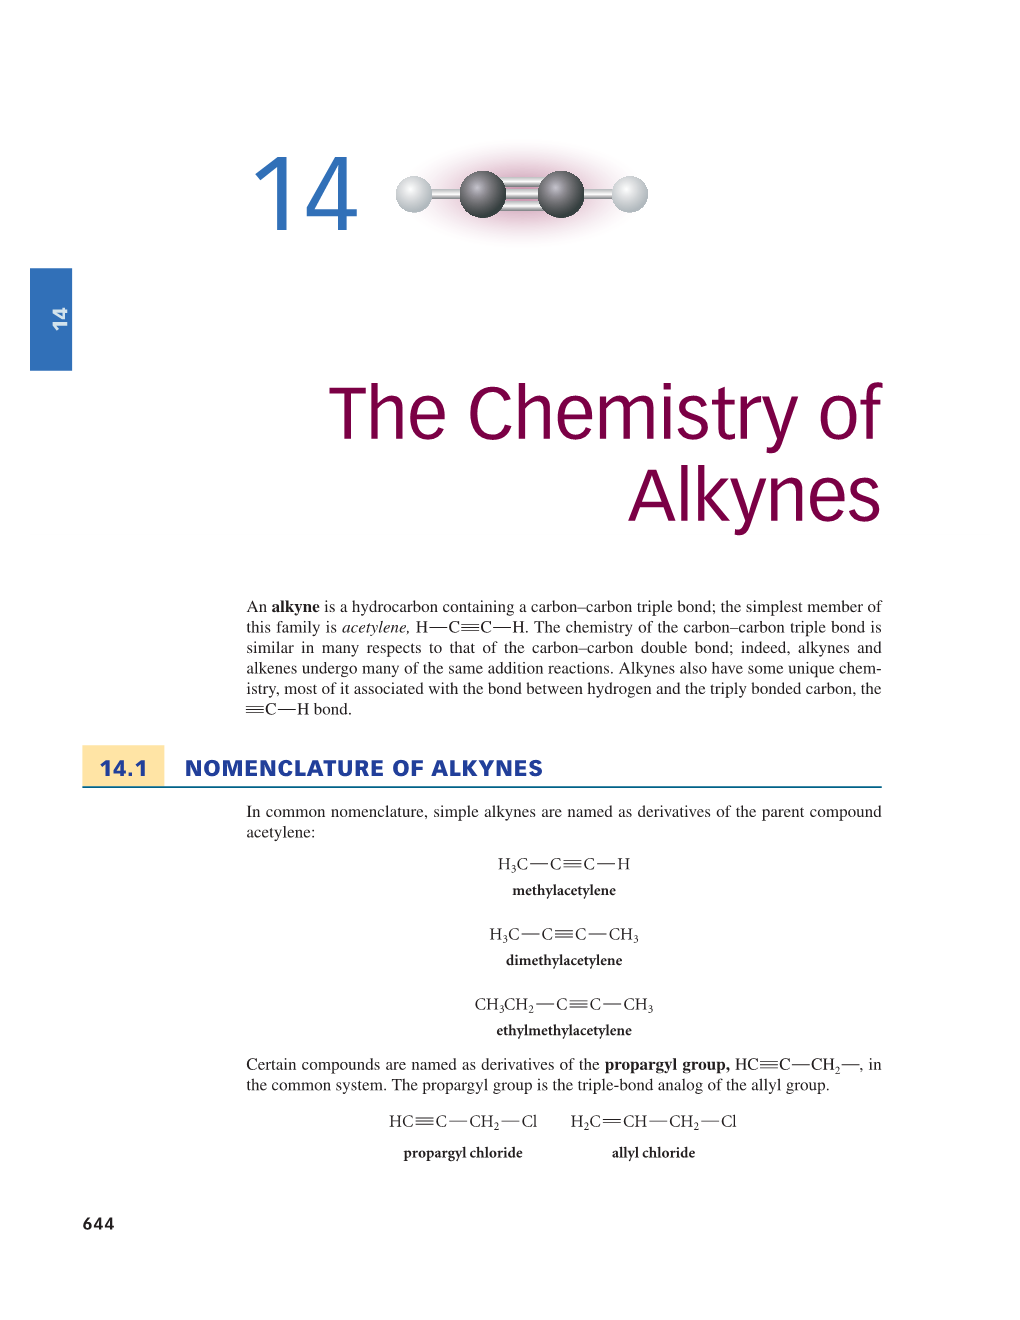 The Chemistry of Alkynes